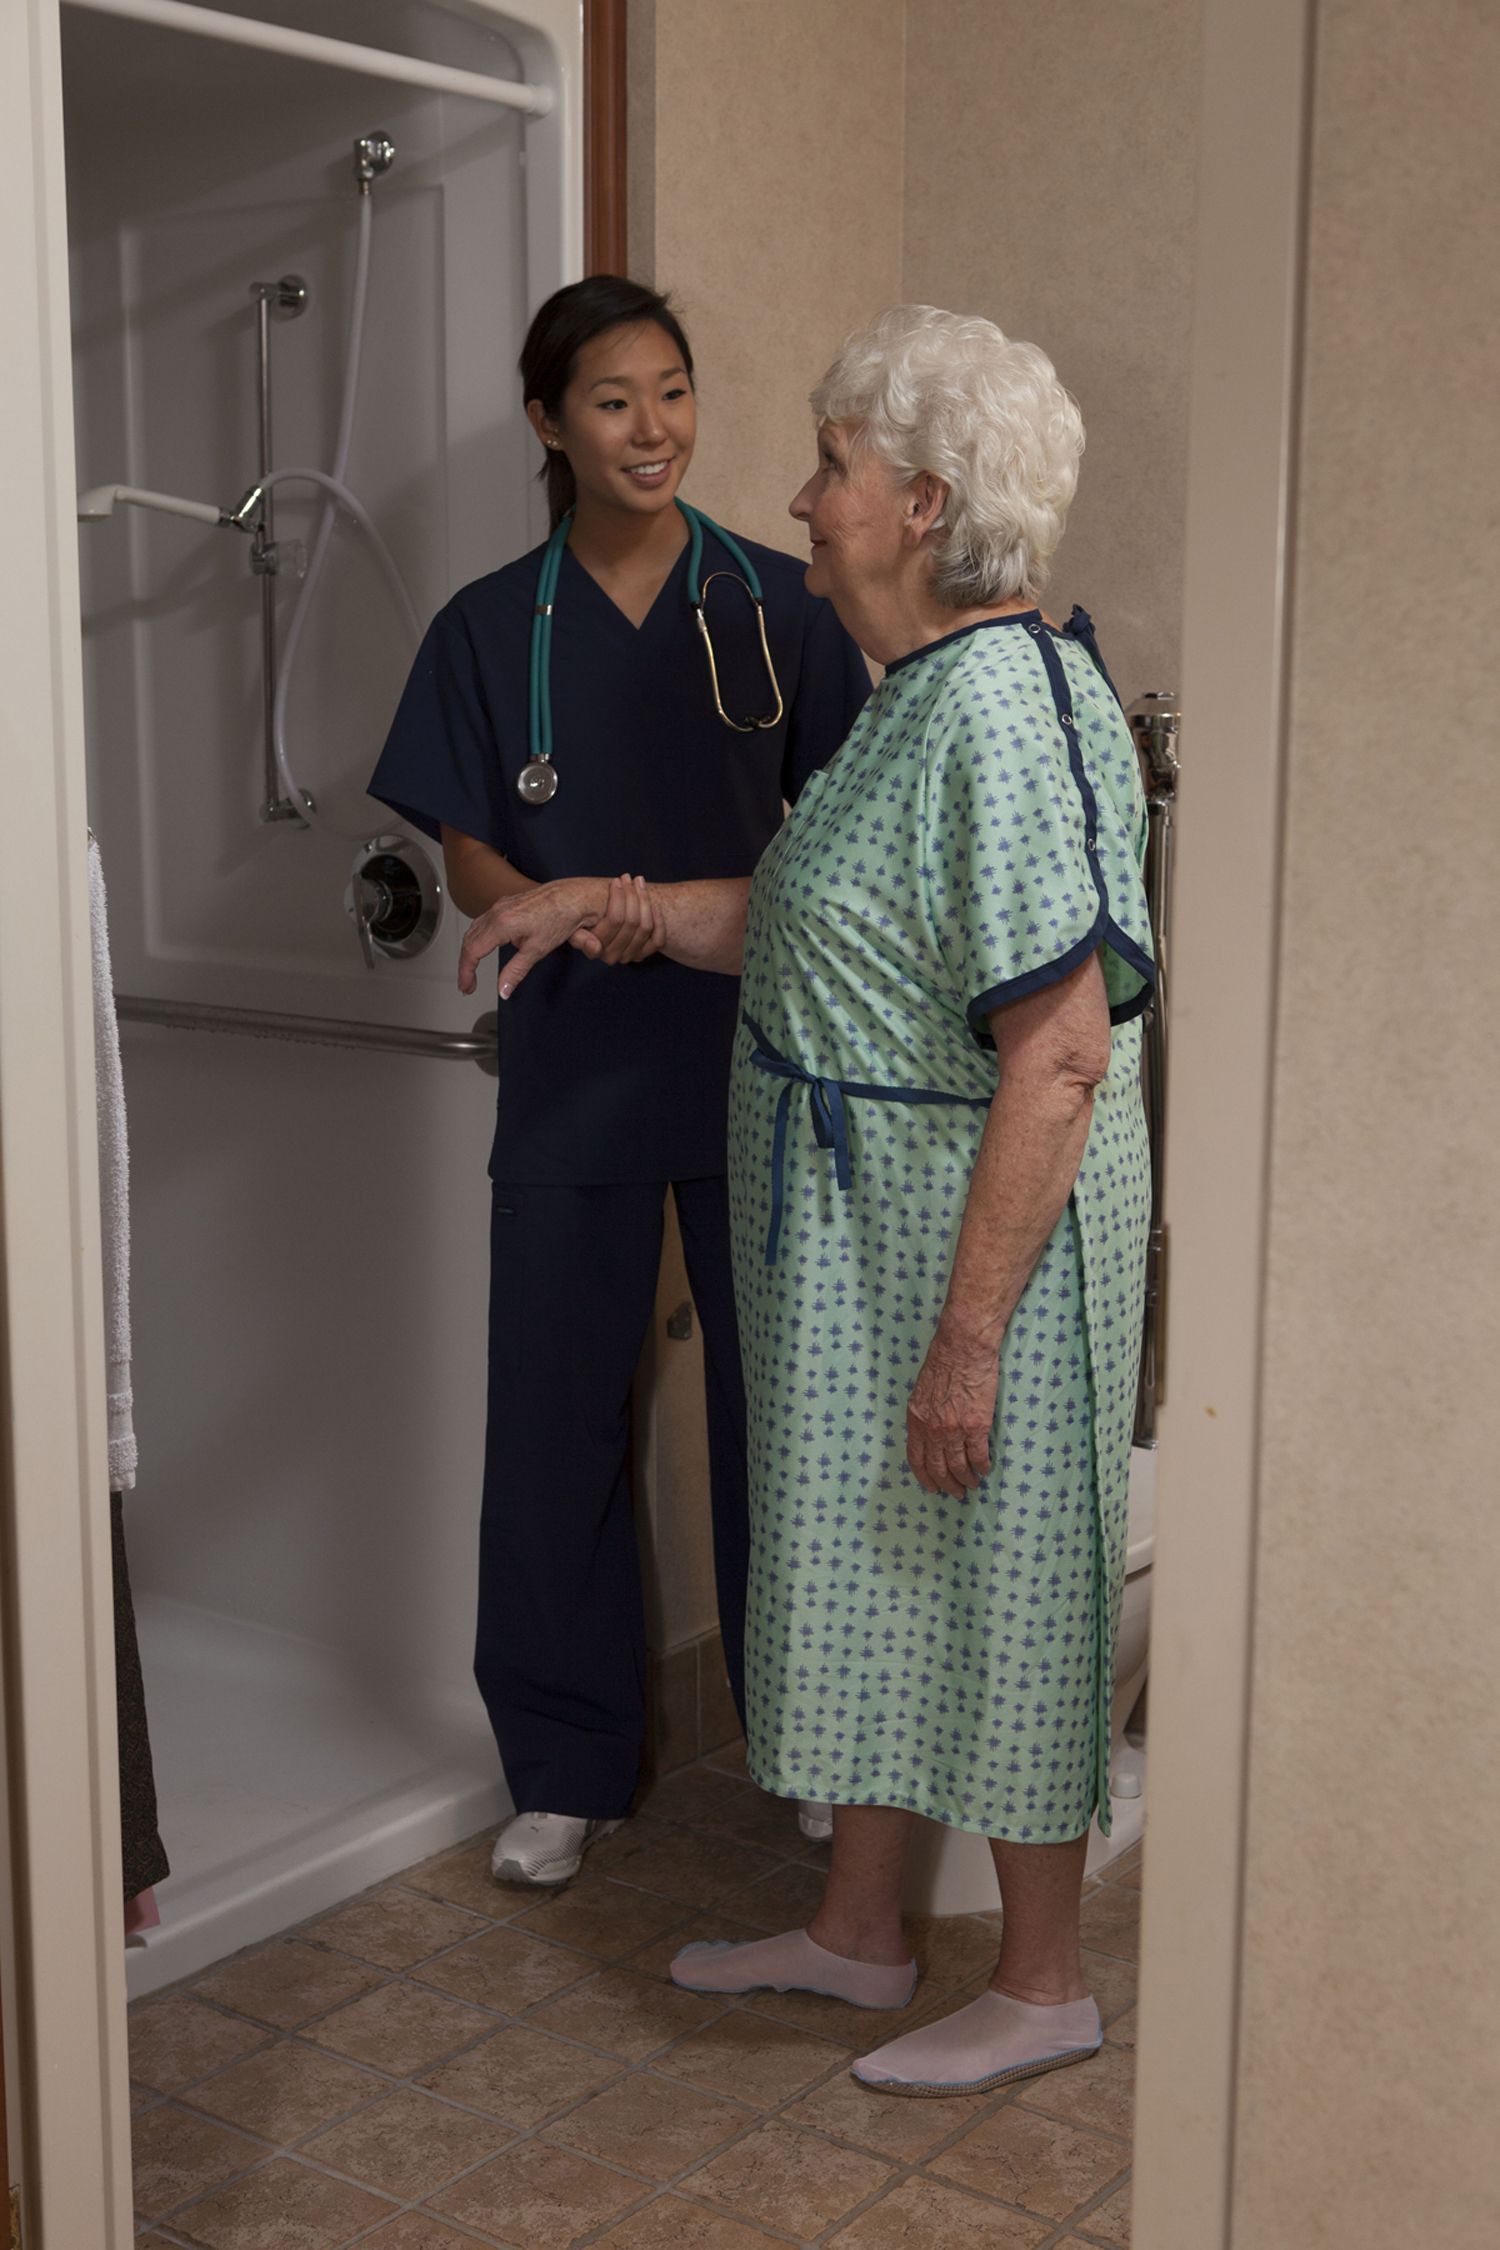 Encompass Group, LLC Introduces Albahealth® Shower-Steps™ flexible sole patient safety footwear featuring a lightweight mesh profile, designed for use on wet surfaces.